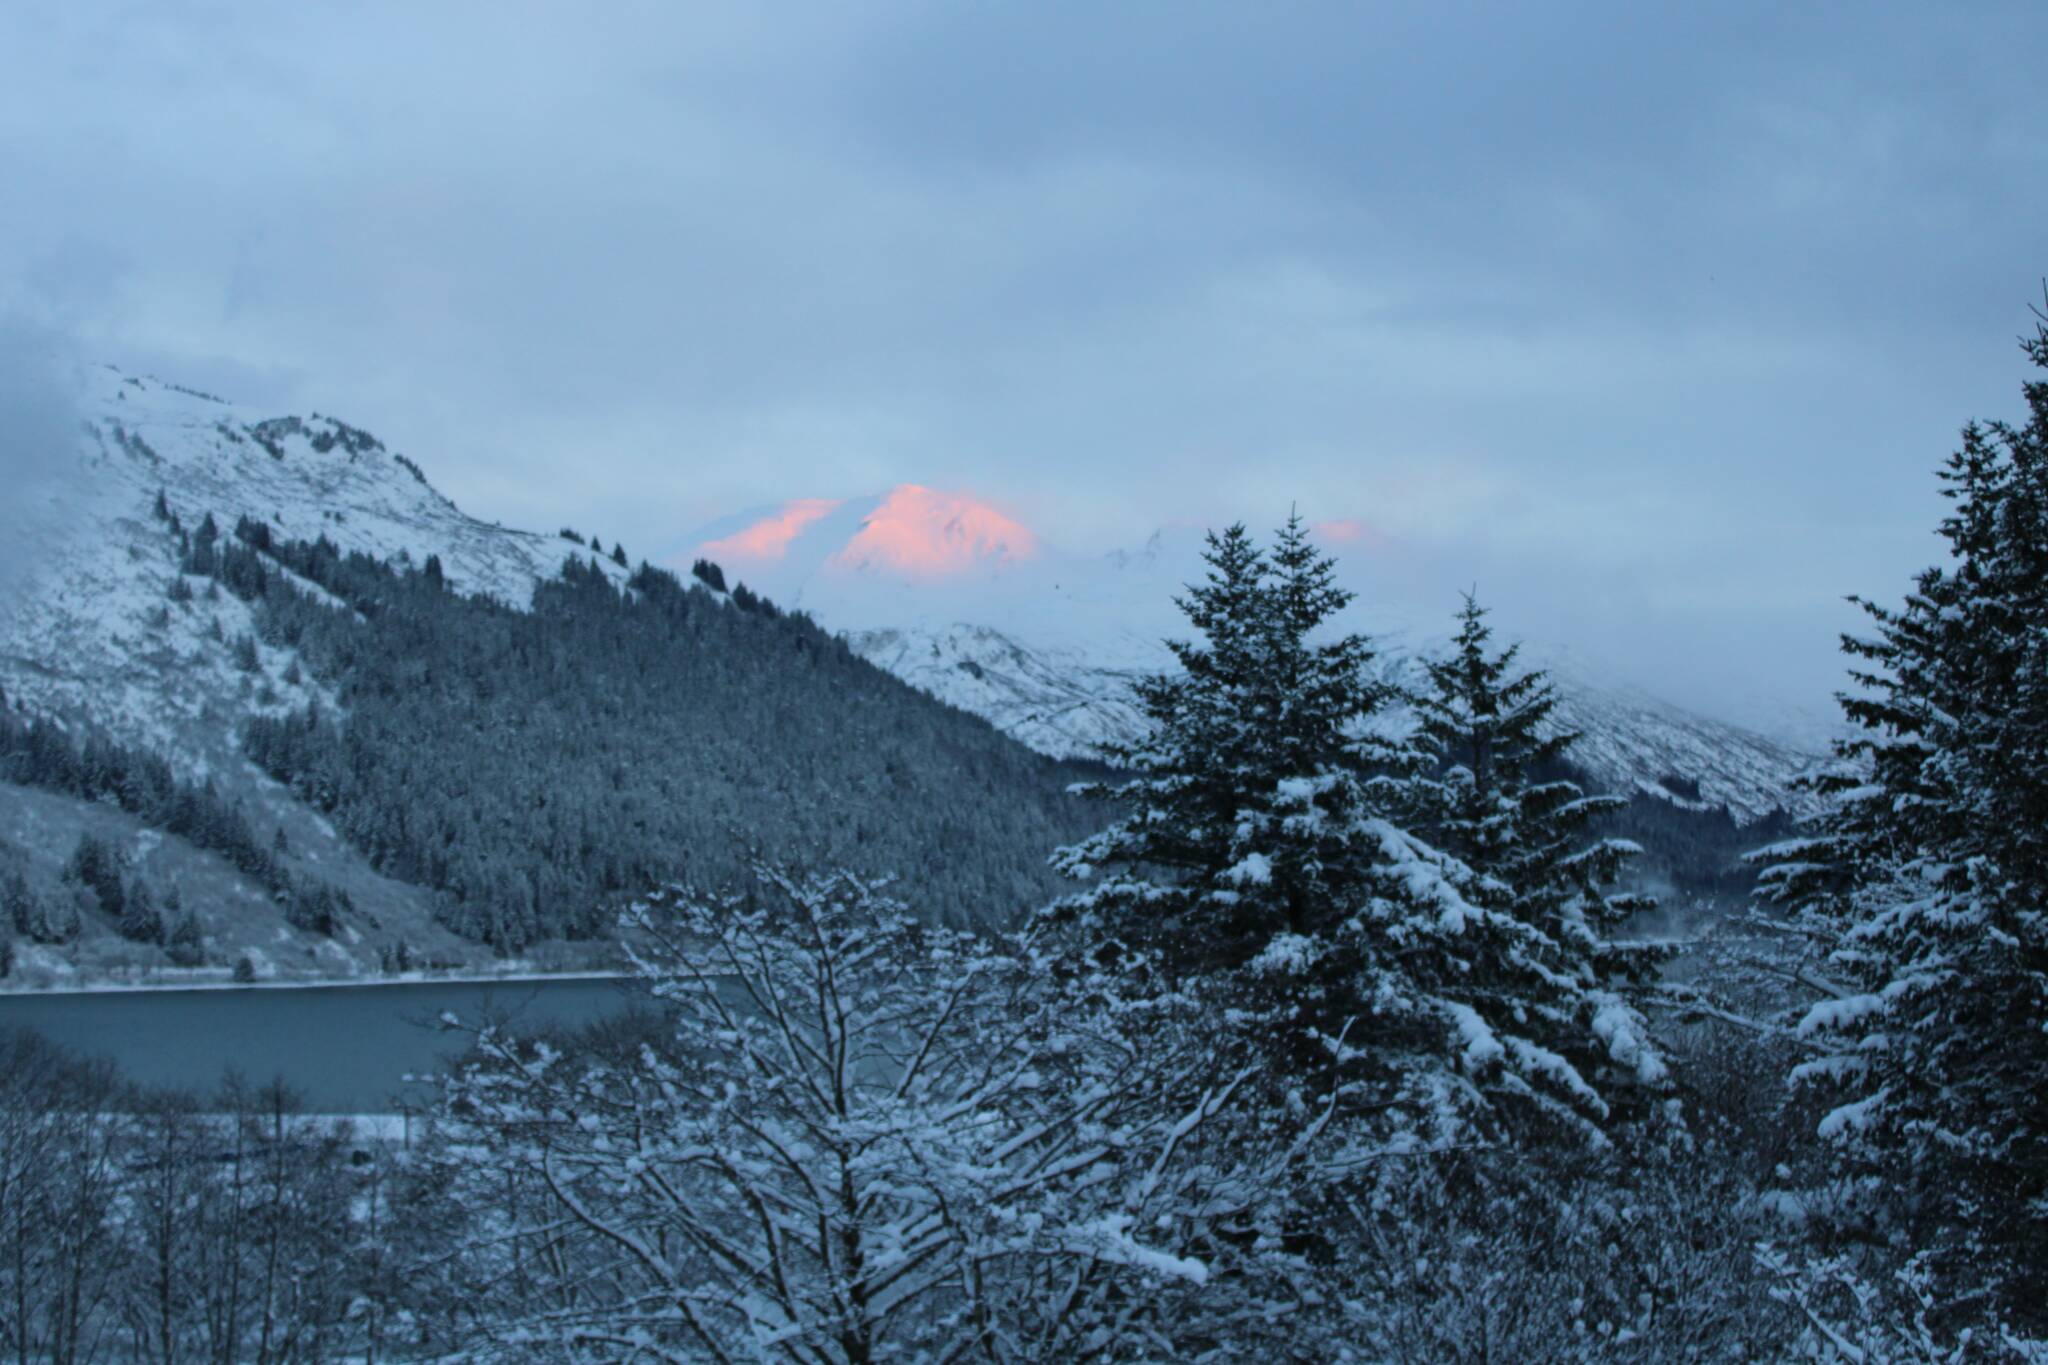 Clearing skies appeared over the Gastineau Channel late in the afternoon on Tuesday, Dec. 21, after a quick-moving snowstorm dumped up to 11 inches of snow across the City and Borough of Juneau. (Dana Zigmund / Juneau Empire)